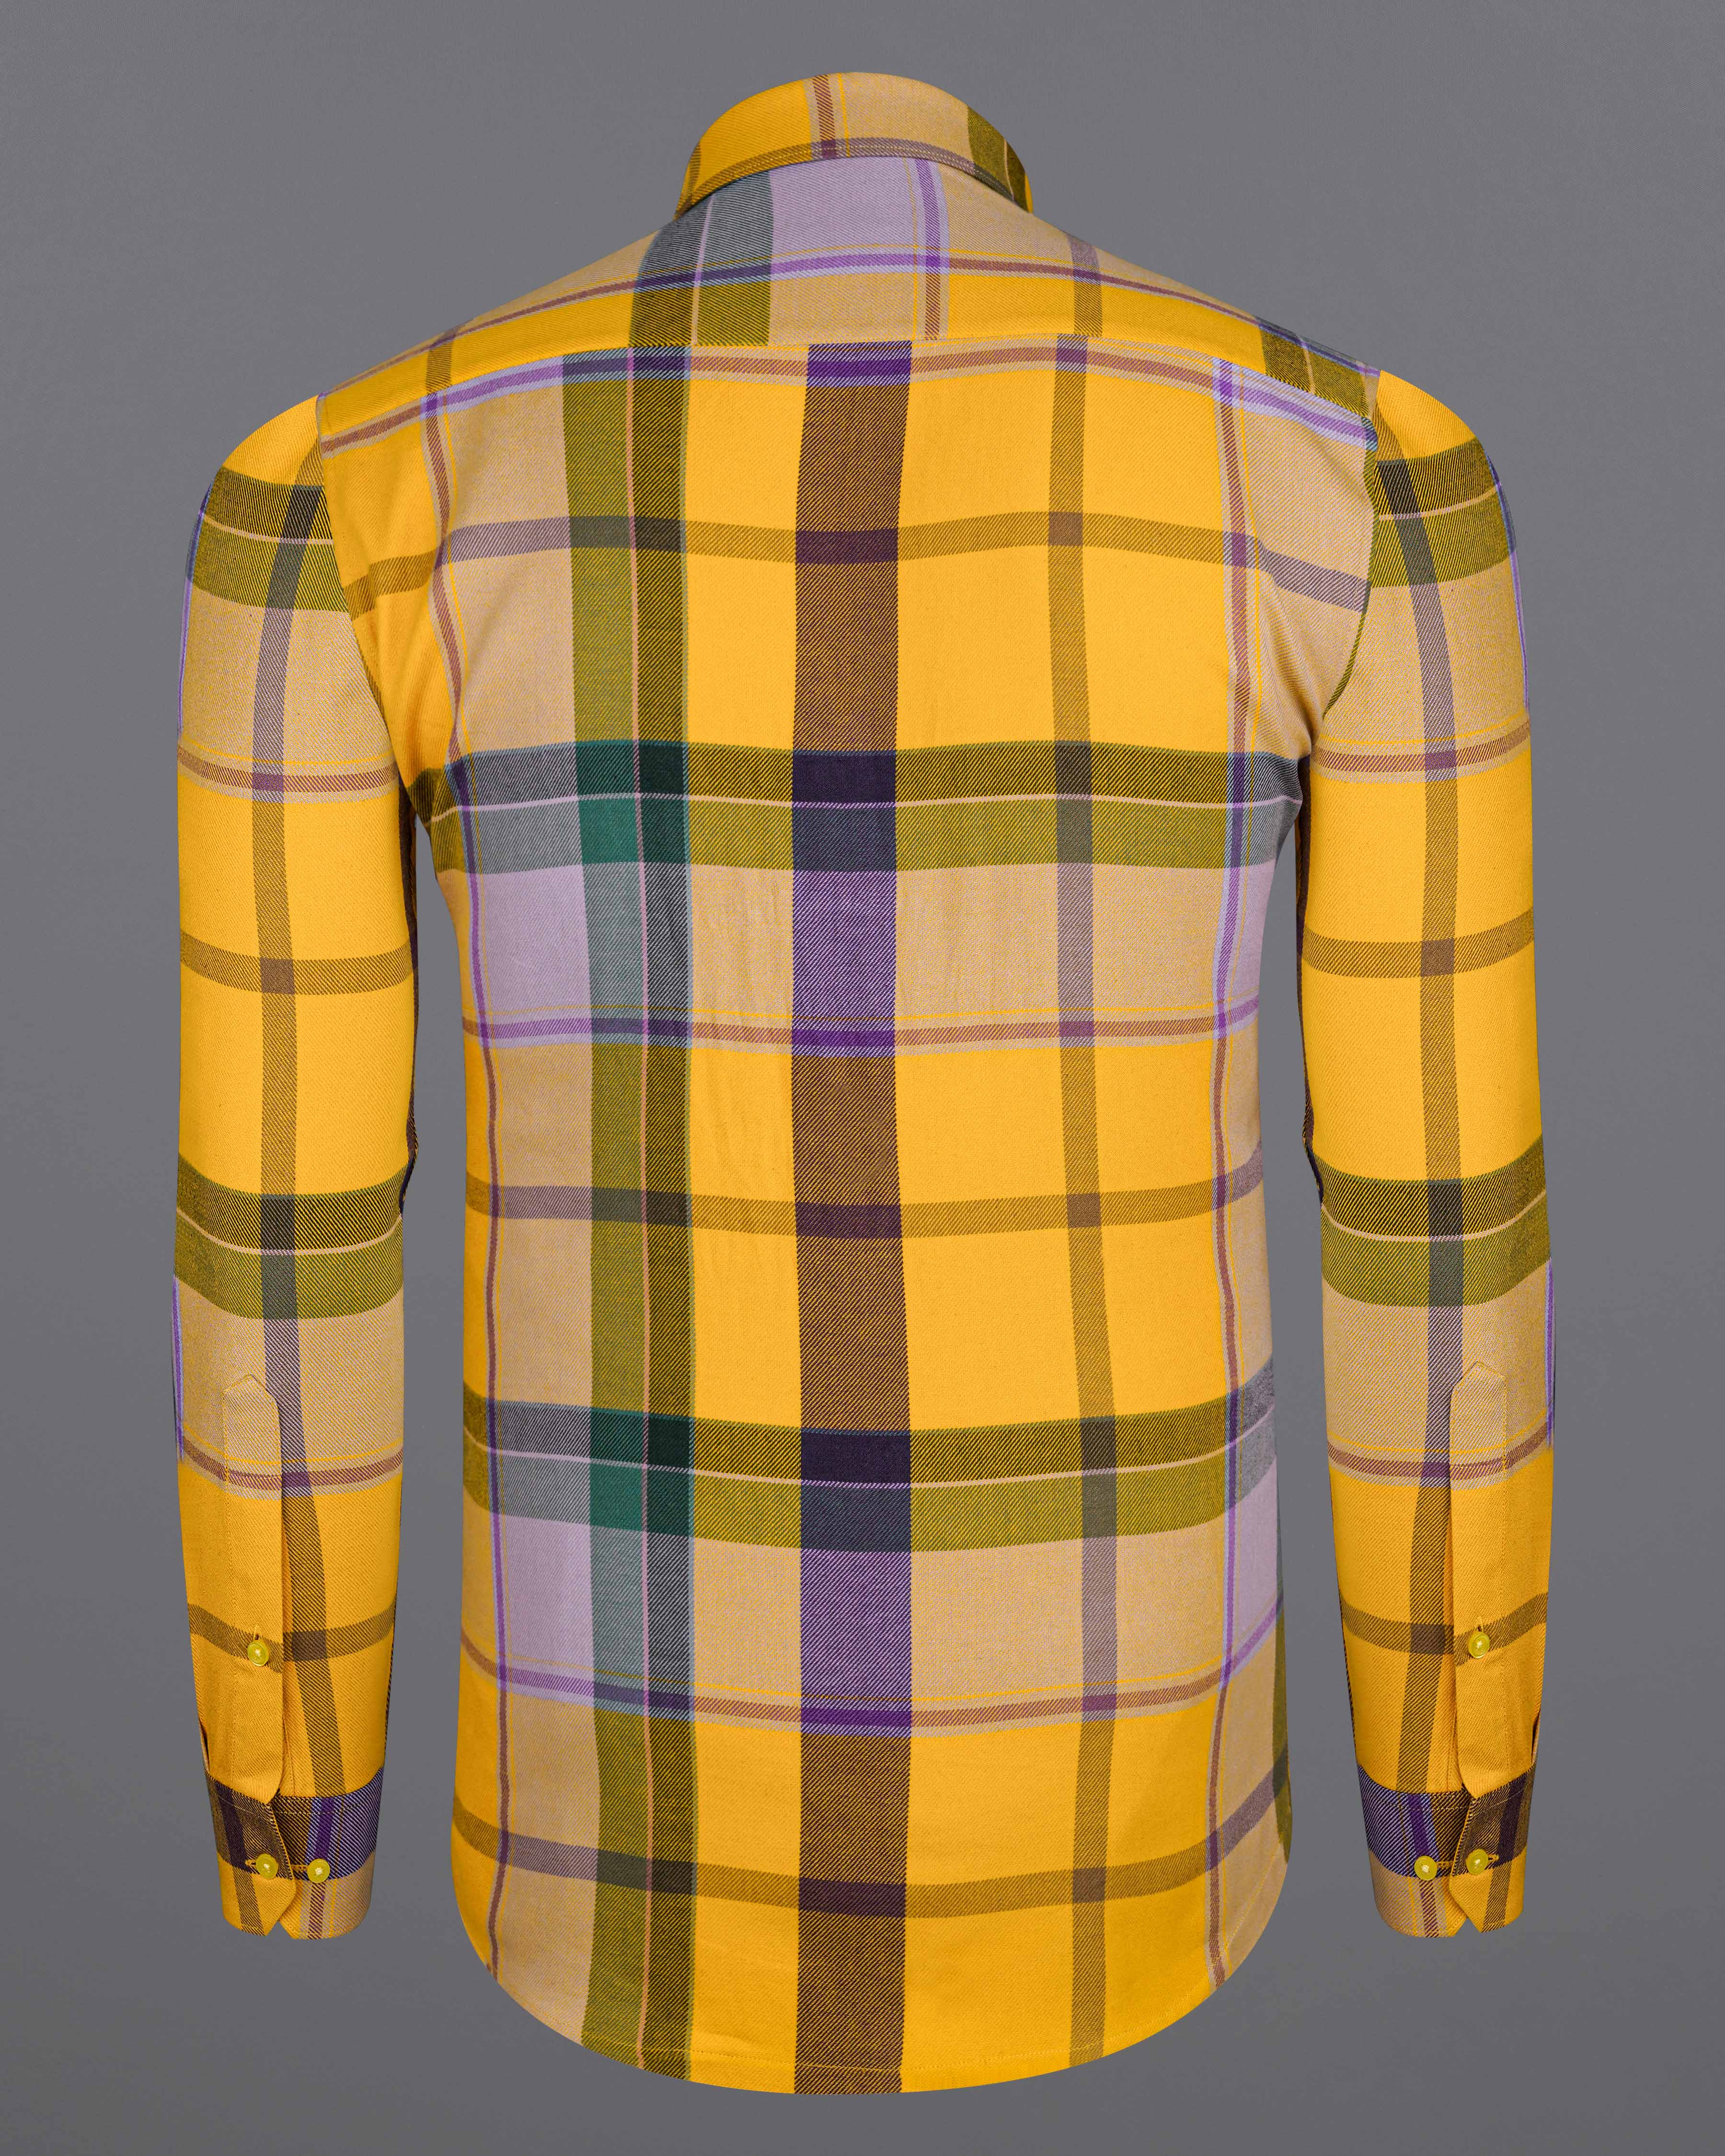 Squash Yellow with Fuchsia Purple and Spruce Green Plaid Flannel Overshirt  8441-BD-YL-38, 8441-BD-YL-H-38,8441-BD-YL-39,8441-BD-YL-H-39,8441-BD-YL-40,8441-BD-YL-H-40,8441-BD-YL-42,8441-BD-YL-H-42,8441-BD-YL-44,8441-BD-YL-H-44,8441-BD-YL-46,8441-BD-YL-H-46,8441-BD-YL-48,8441-BD-YL-H-48,8441-BD-YL-50,8441-BD-YL-H-50,8441-BD-YL-52,8441-BD-YL-H-52